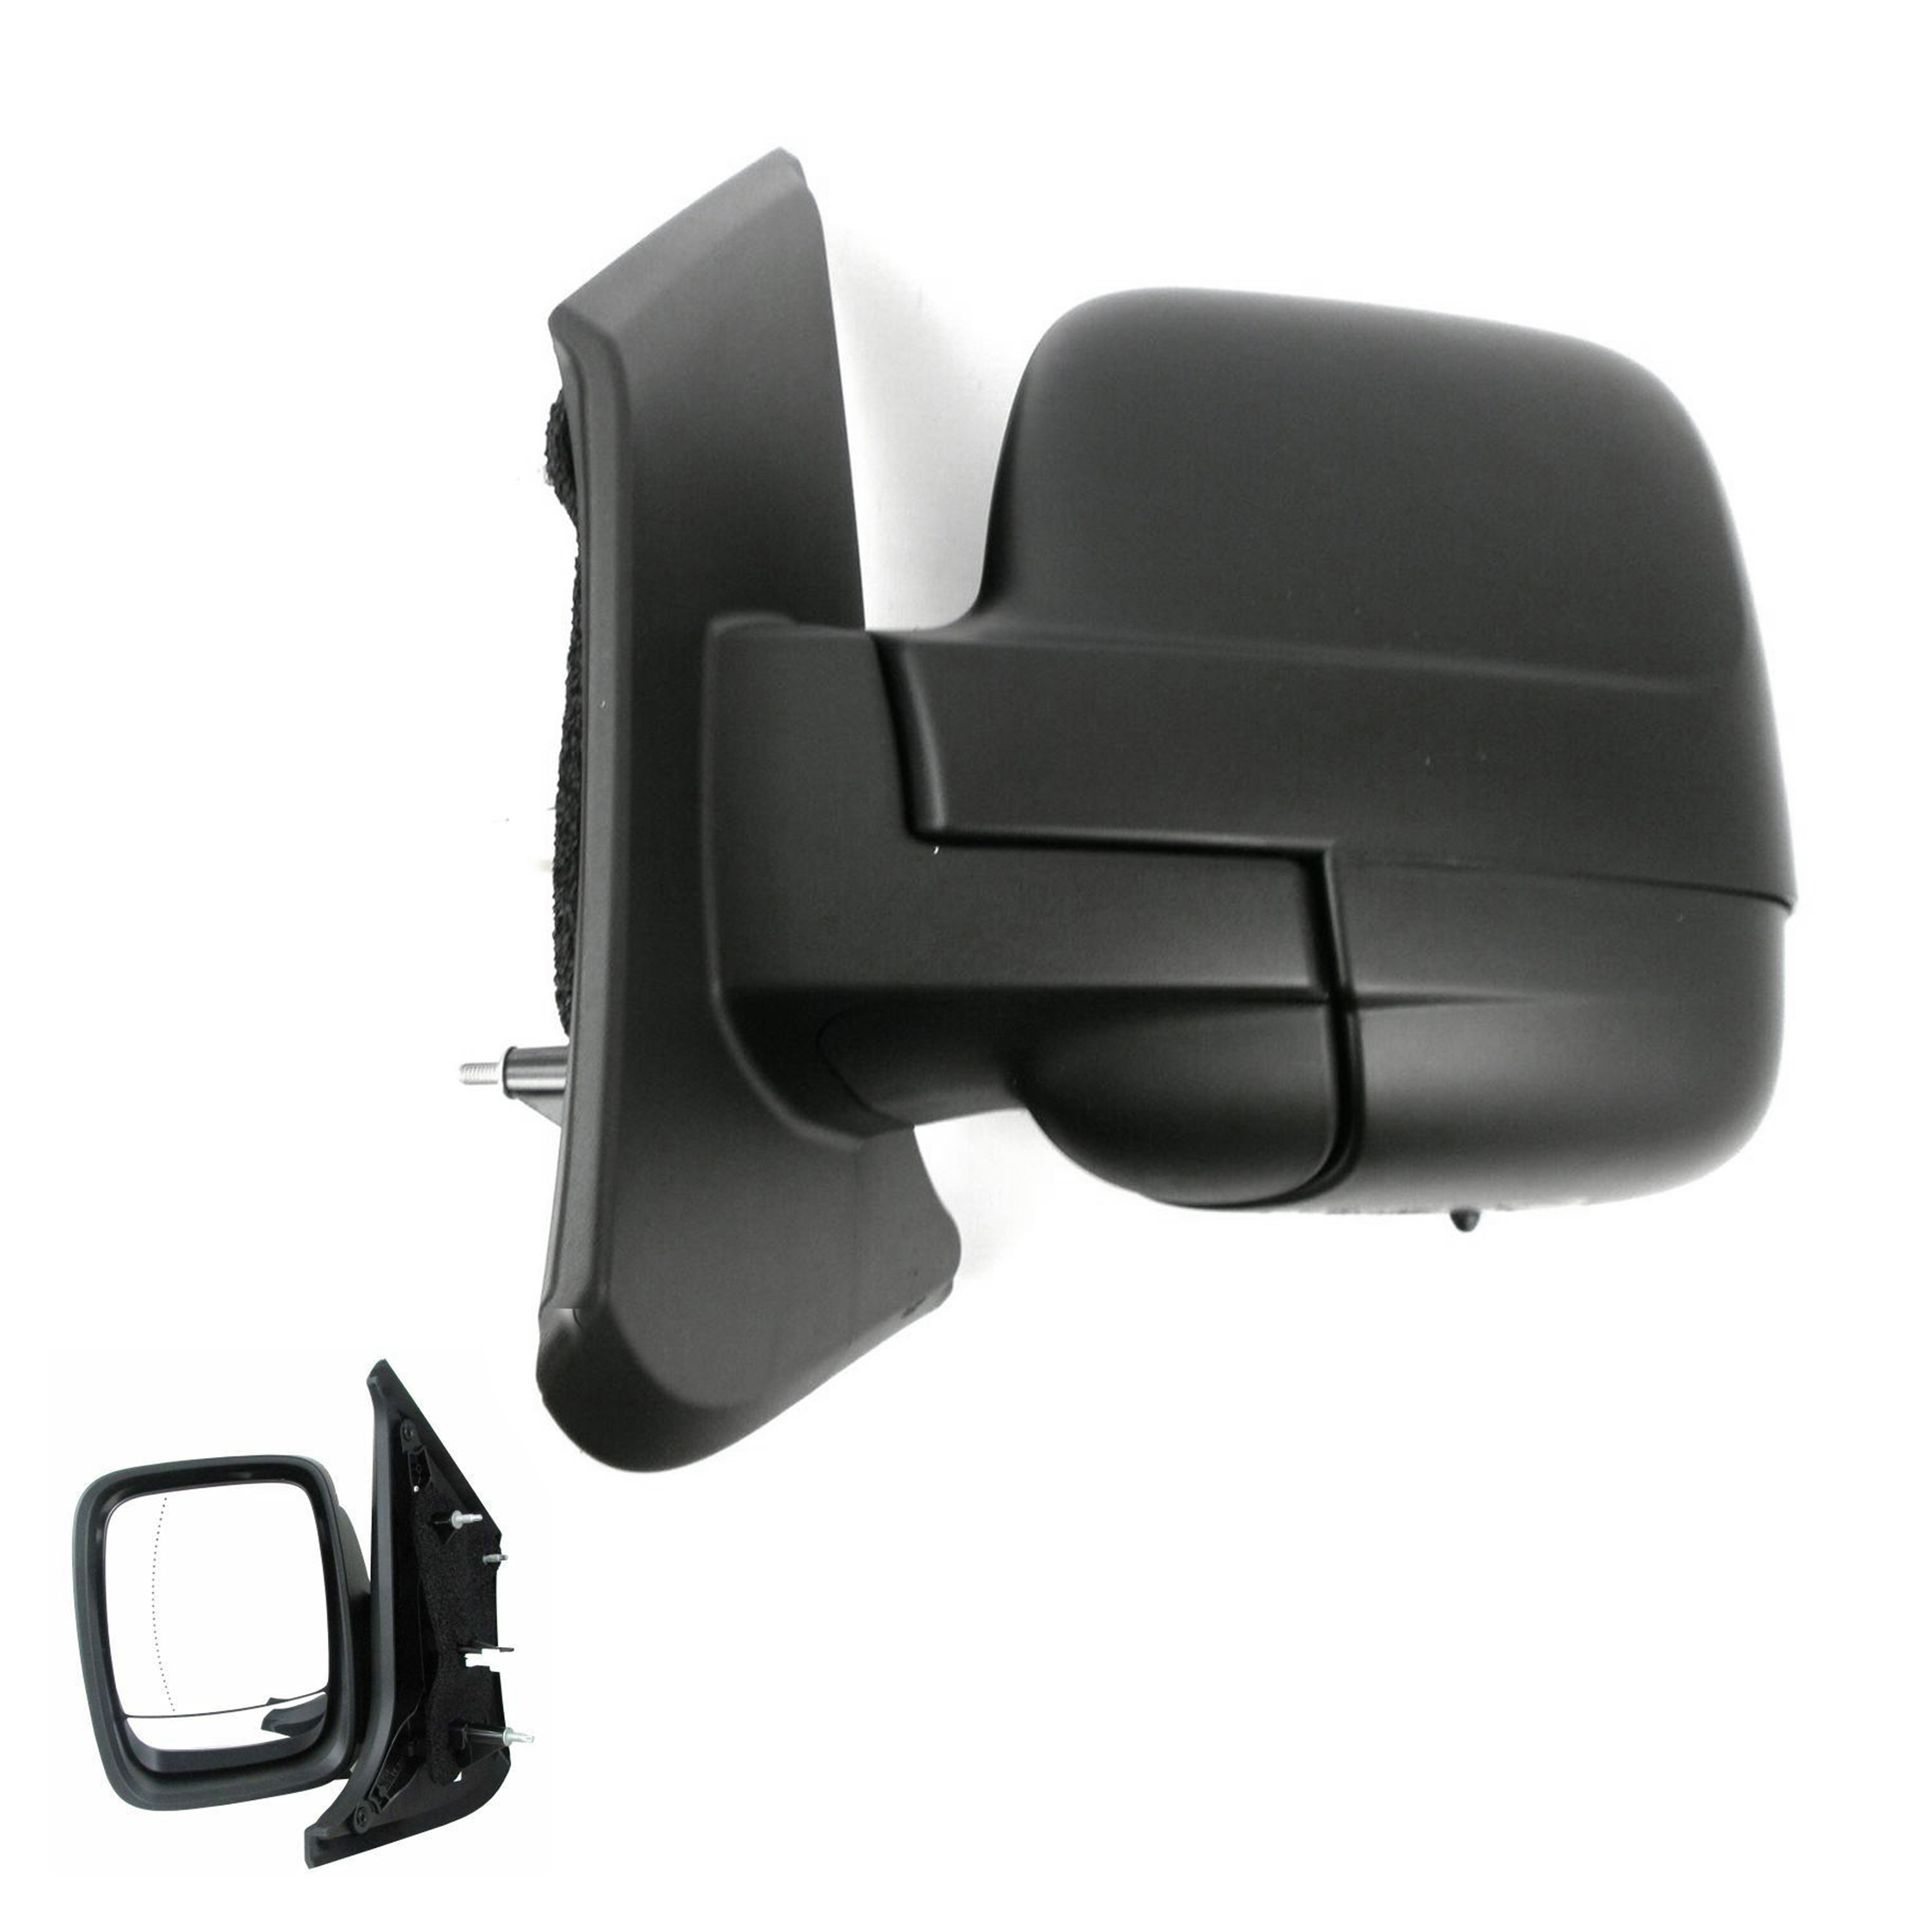 Vauxhall Vivaro Complete Wing Mirror Unit LEFT HAND ( UK Passenger Side ) 2015 to 2019 – Electric Wing Mirror Unit